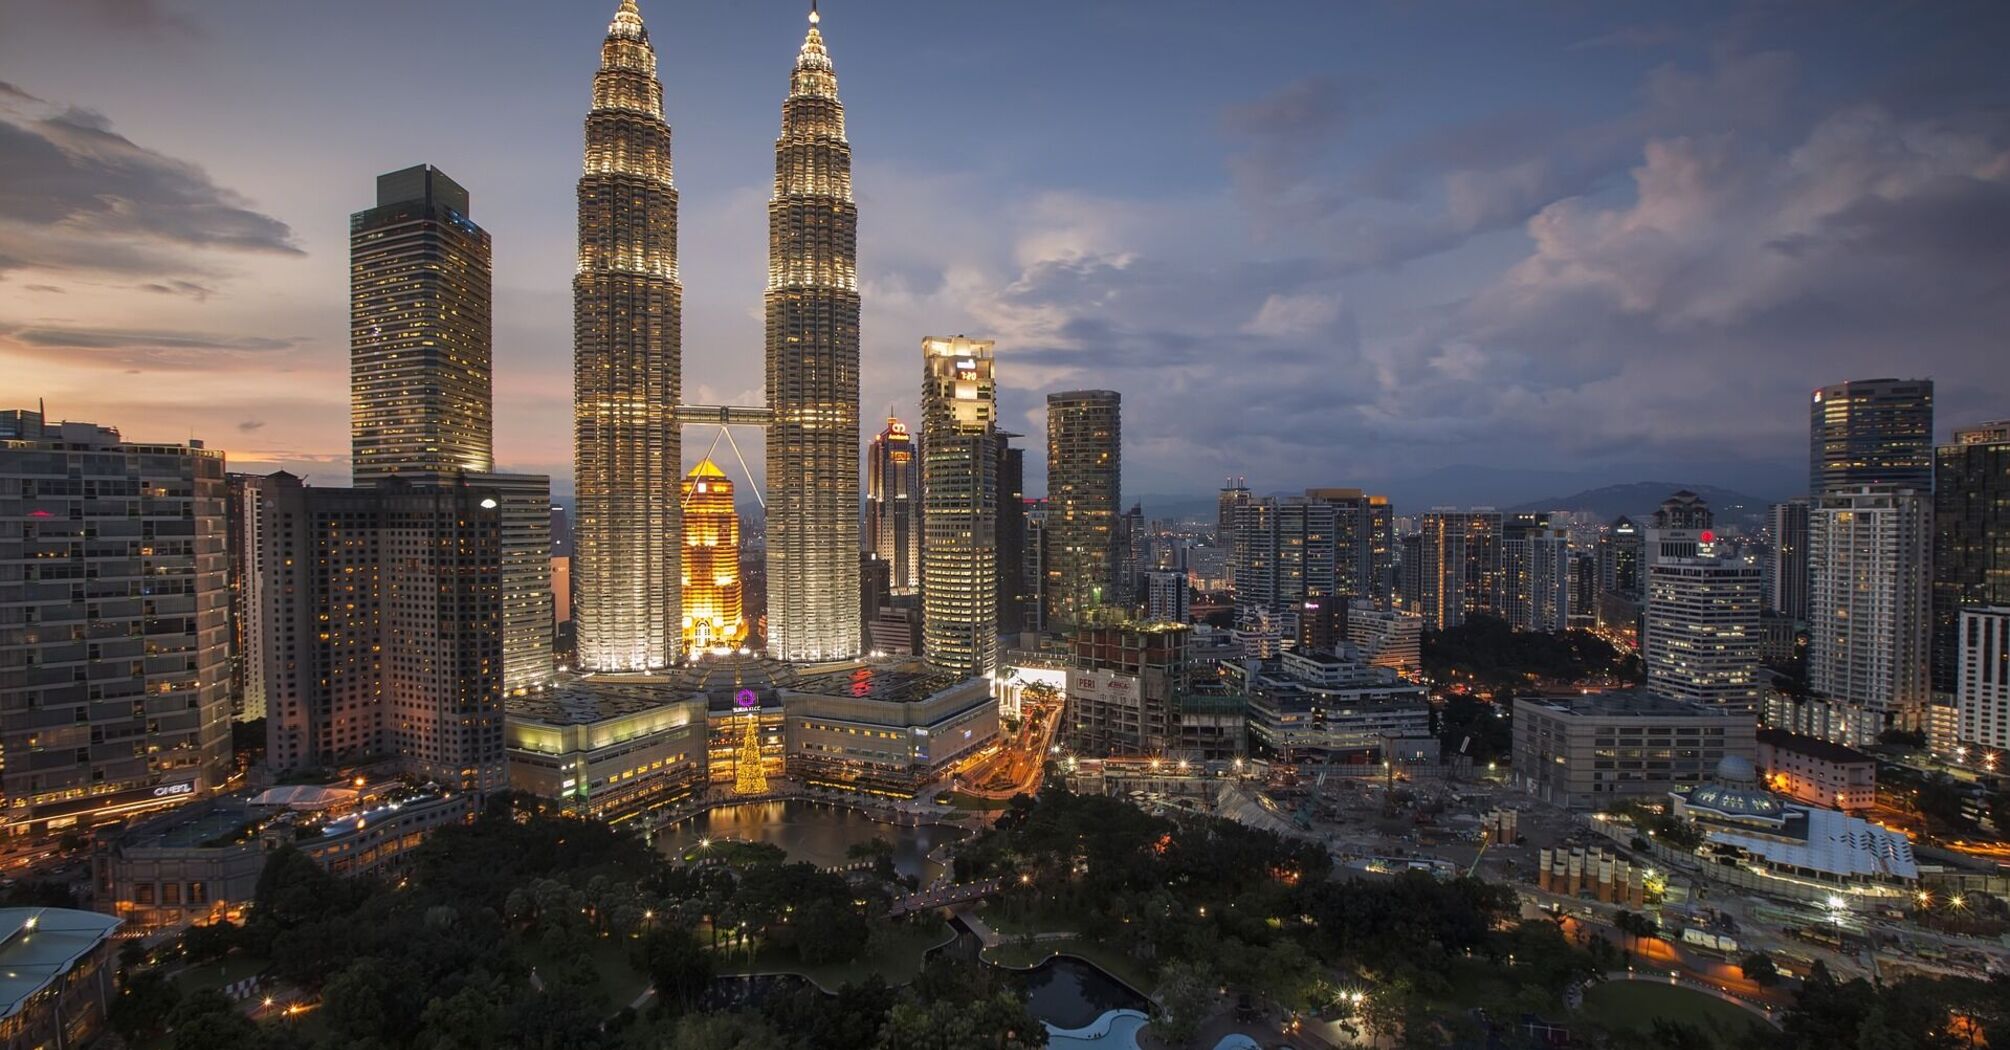 Aerial view of Kuala Lumpur skyline at dusk with the illuminated Petronas Twin Towers and surrounding city lights